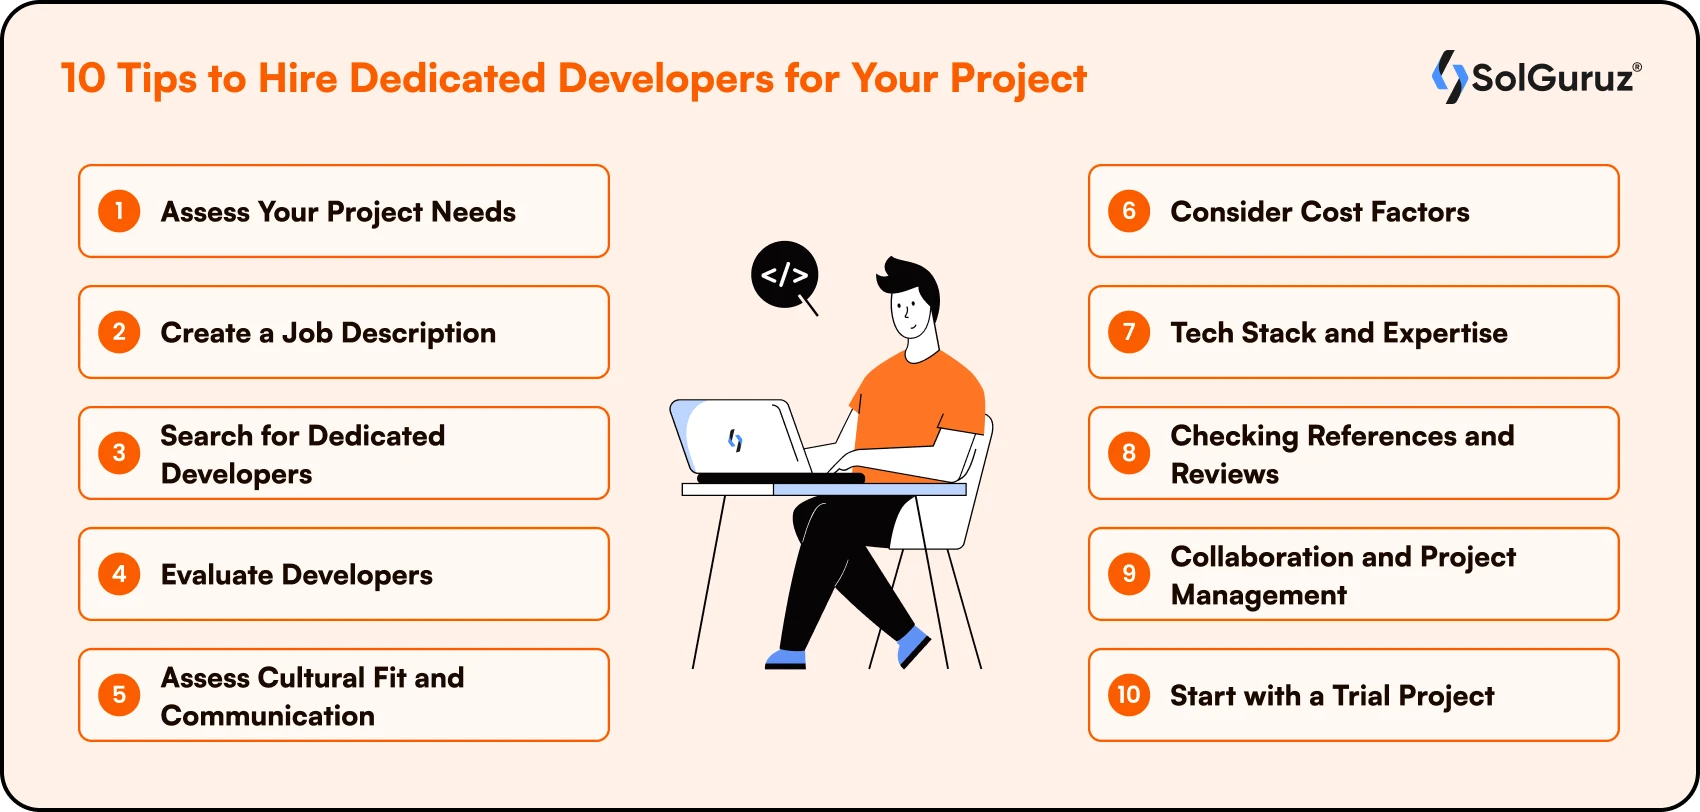 10 Tips to Hire Dedicated Developers for Your Project and Startup